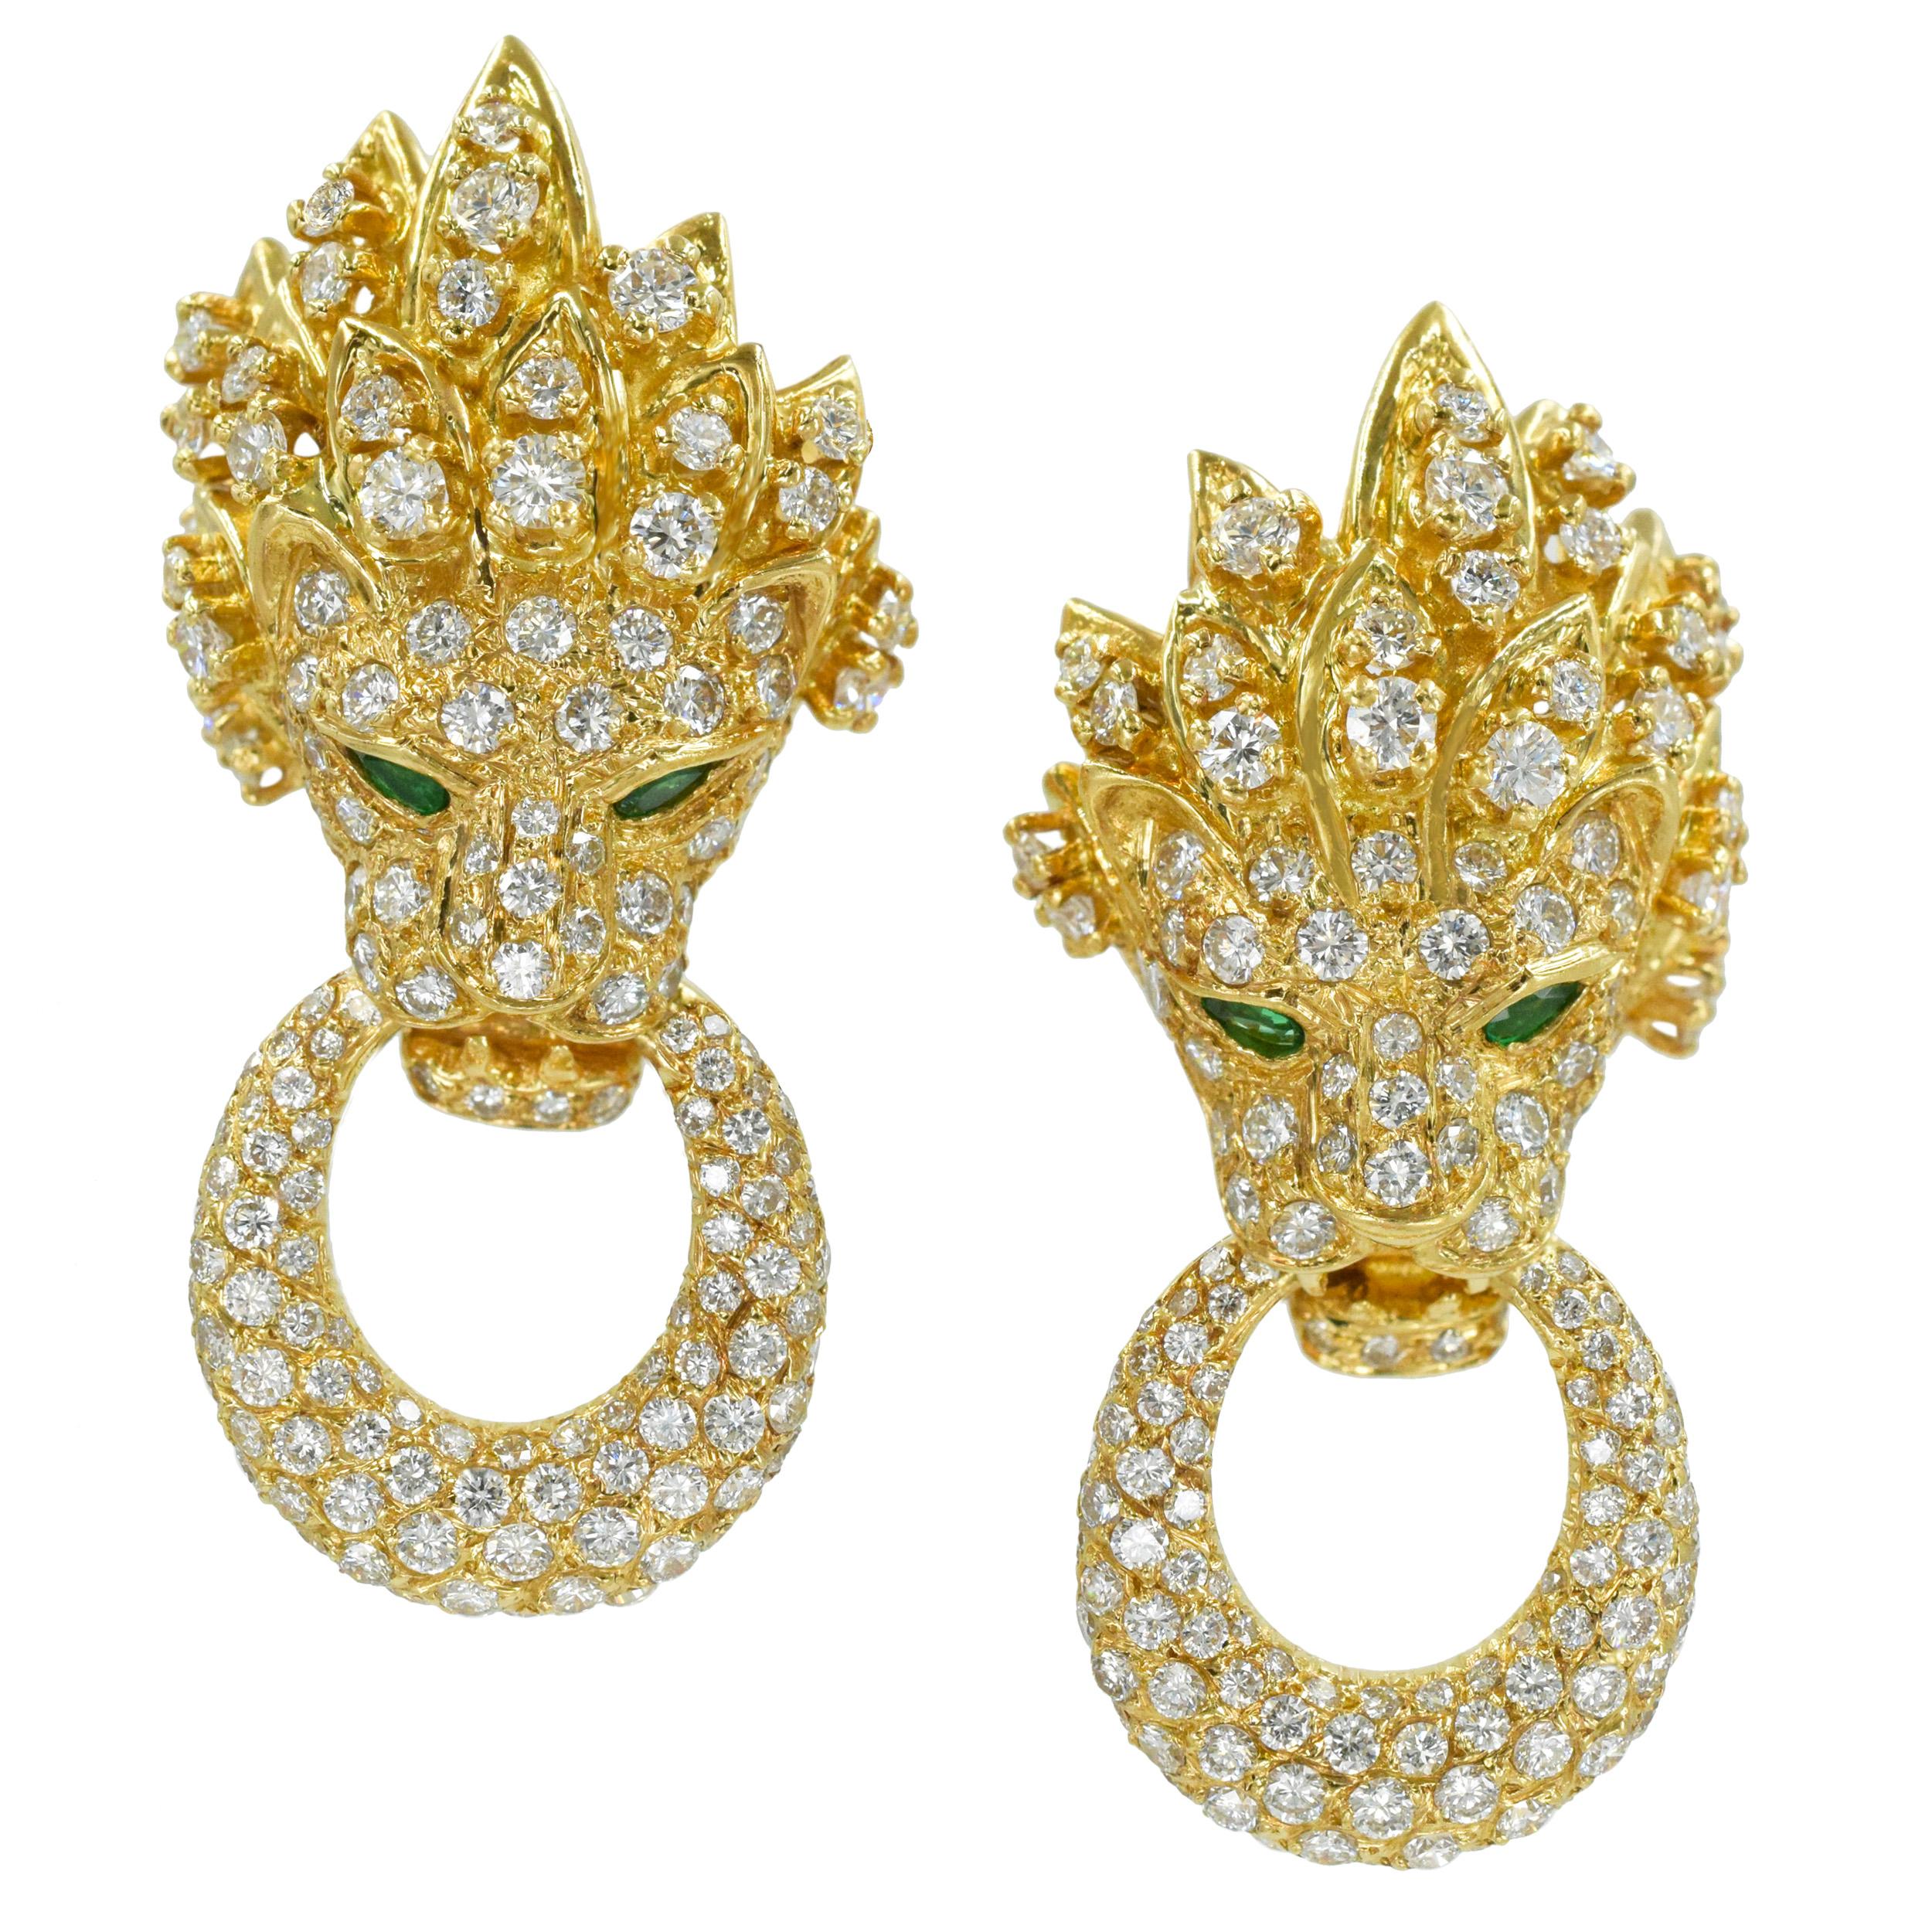 Vintage Van Cleef & Arpels 18k yellow gold, diamond and emerald doorknocker ear clips.
The earrings feature head of the lion holding a large ring in his mouth, both encrusted with diamonds, accented with emerald eyes. 
The earrings are set with 308